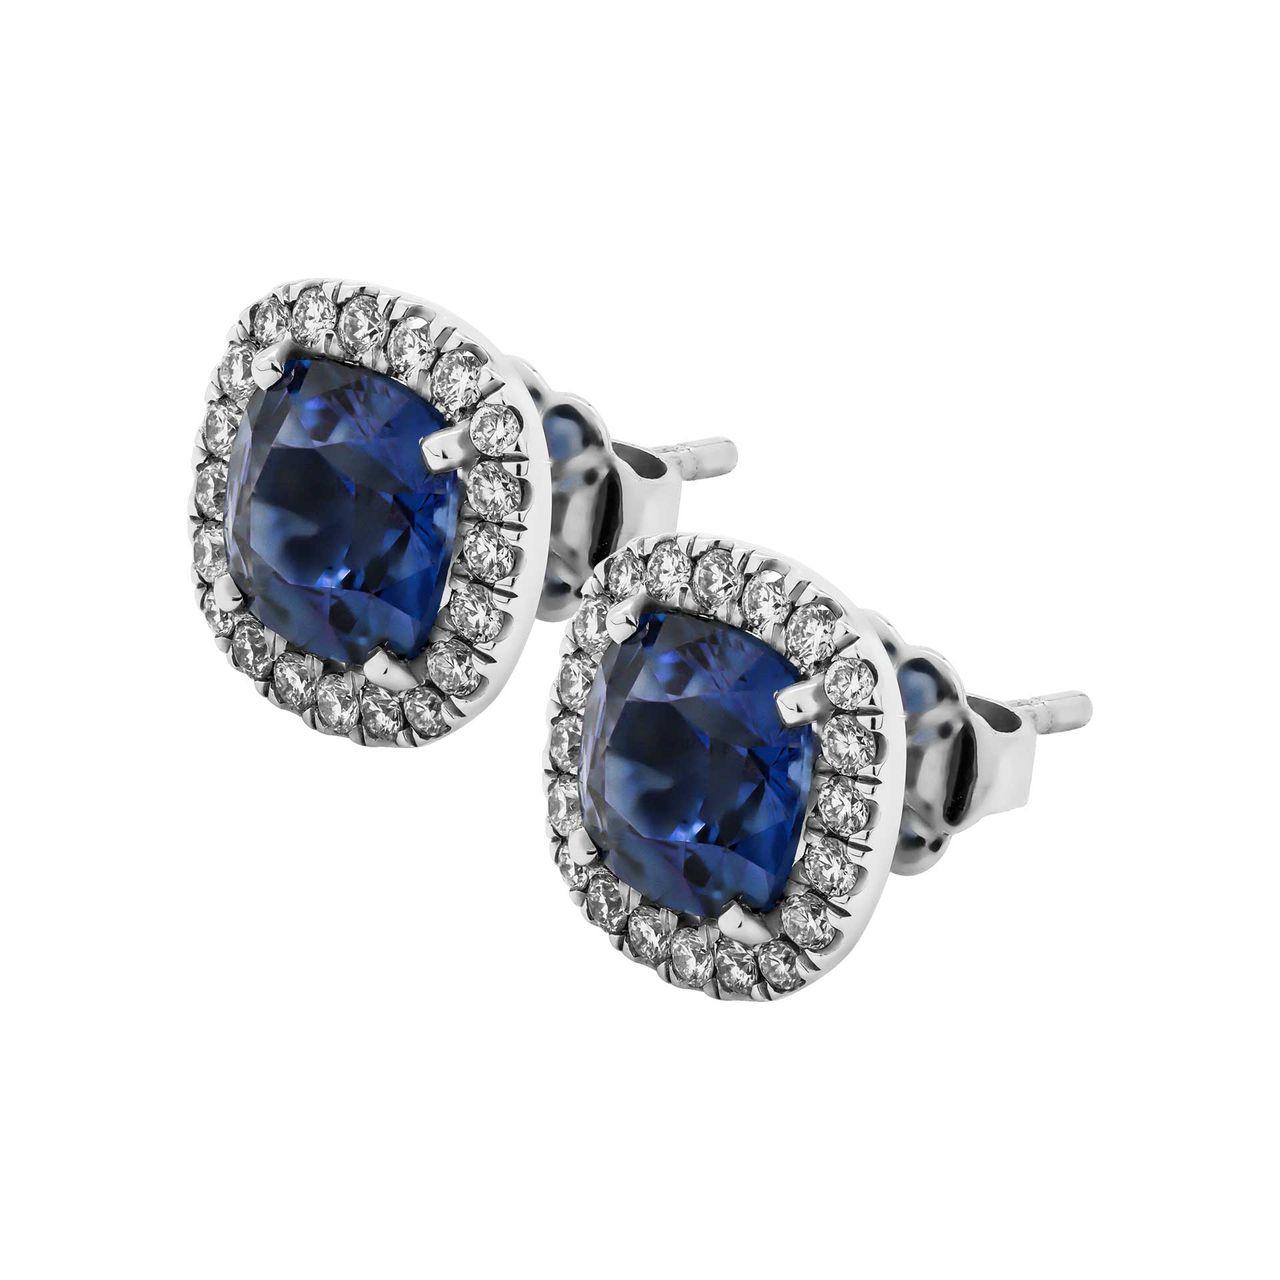 Modern Halo Studs Earrings with Blue Cushion Sapphire in Platinum For Sale